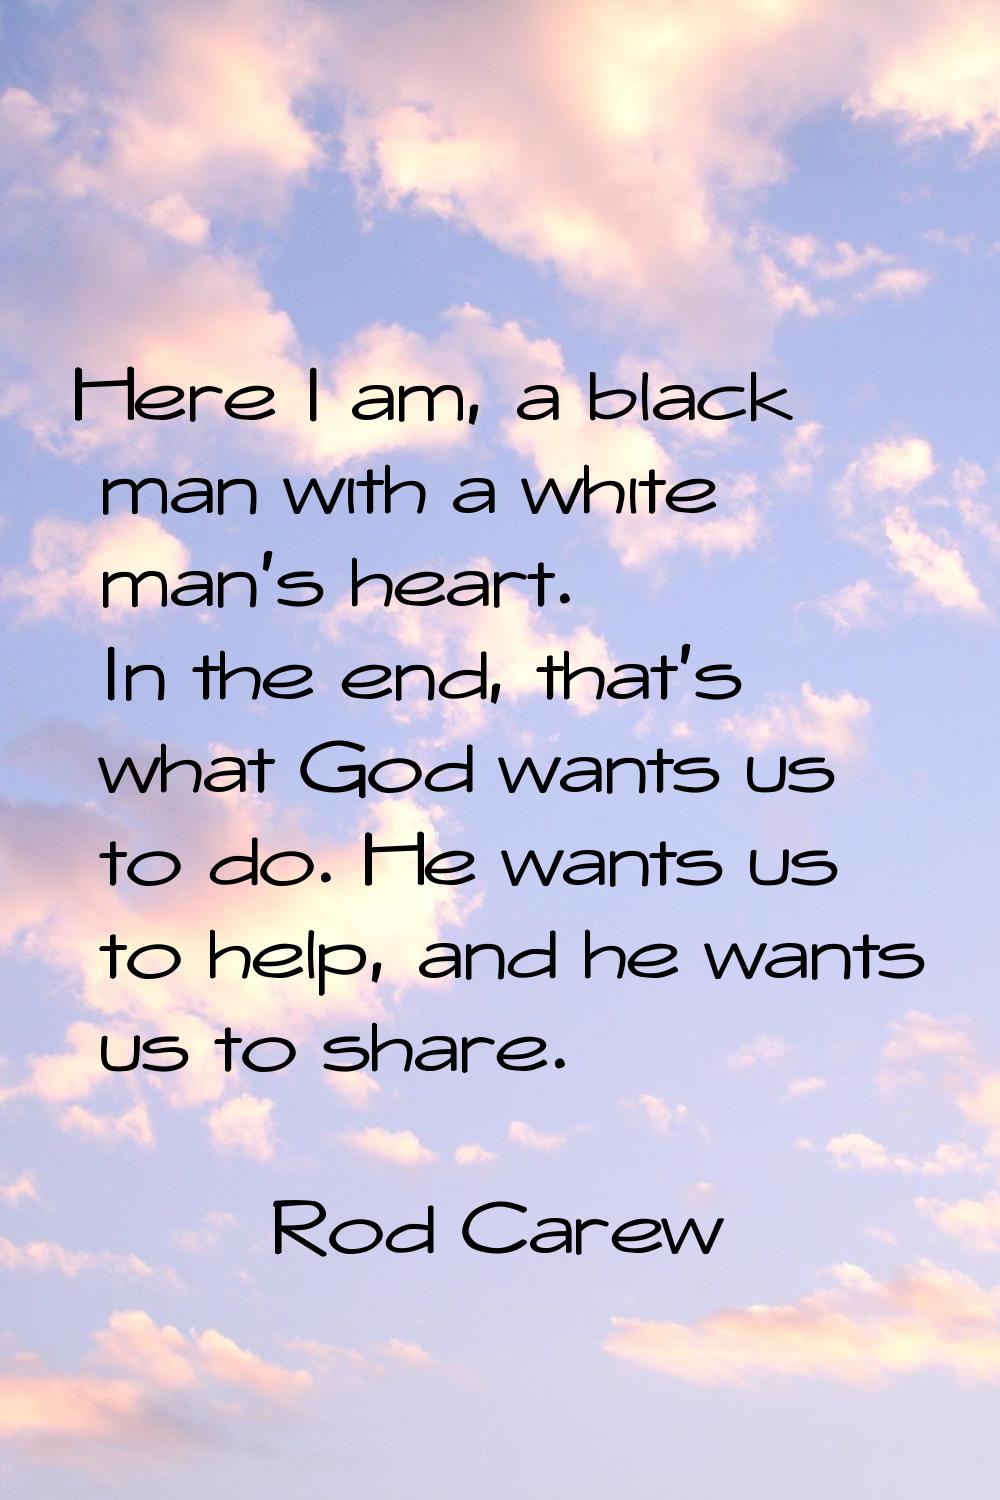 Here I am, a black man with a white man's heart. In the end, that's what God wants us to do. He wan